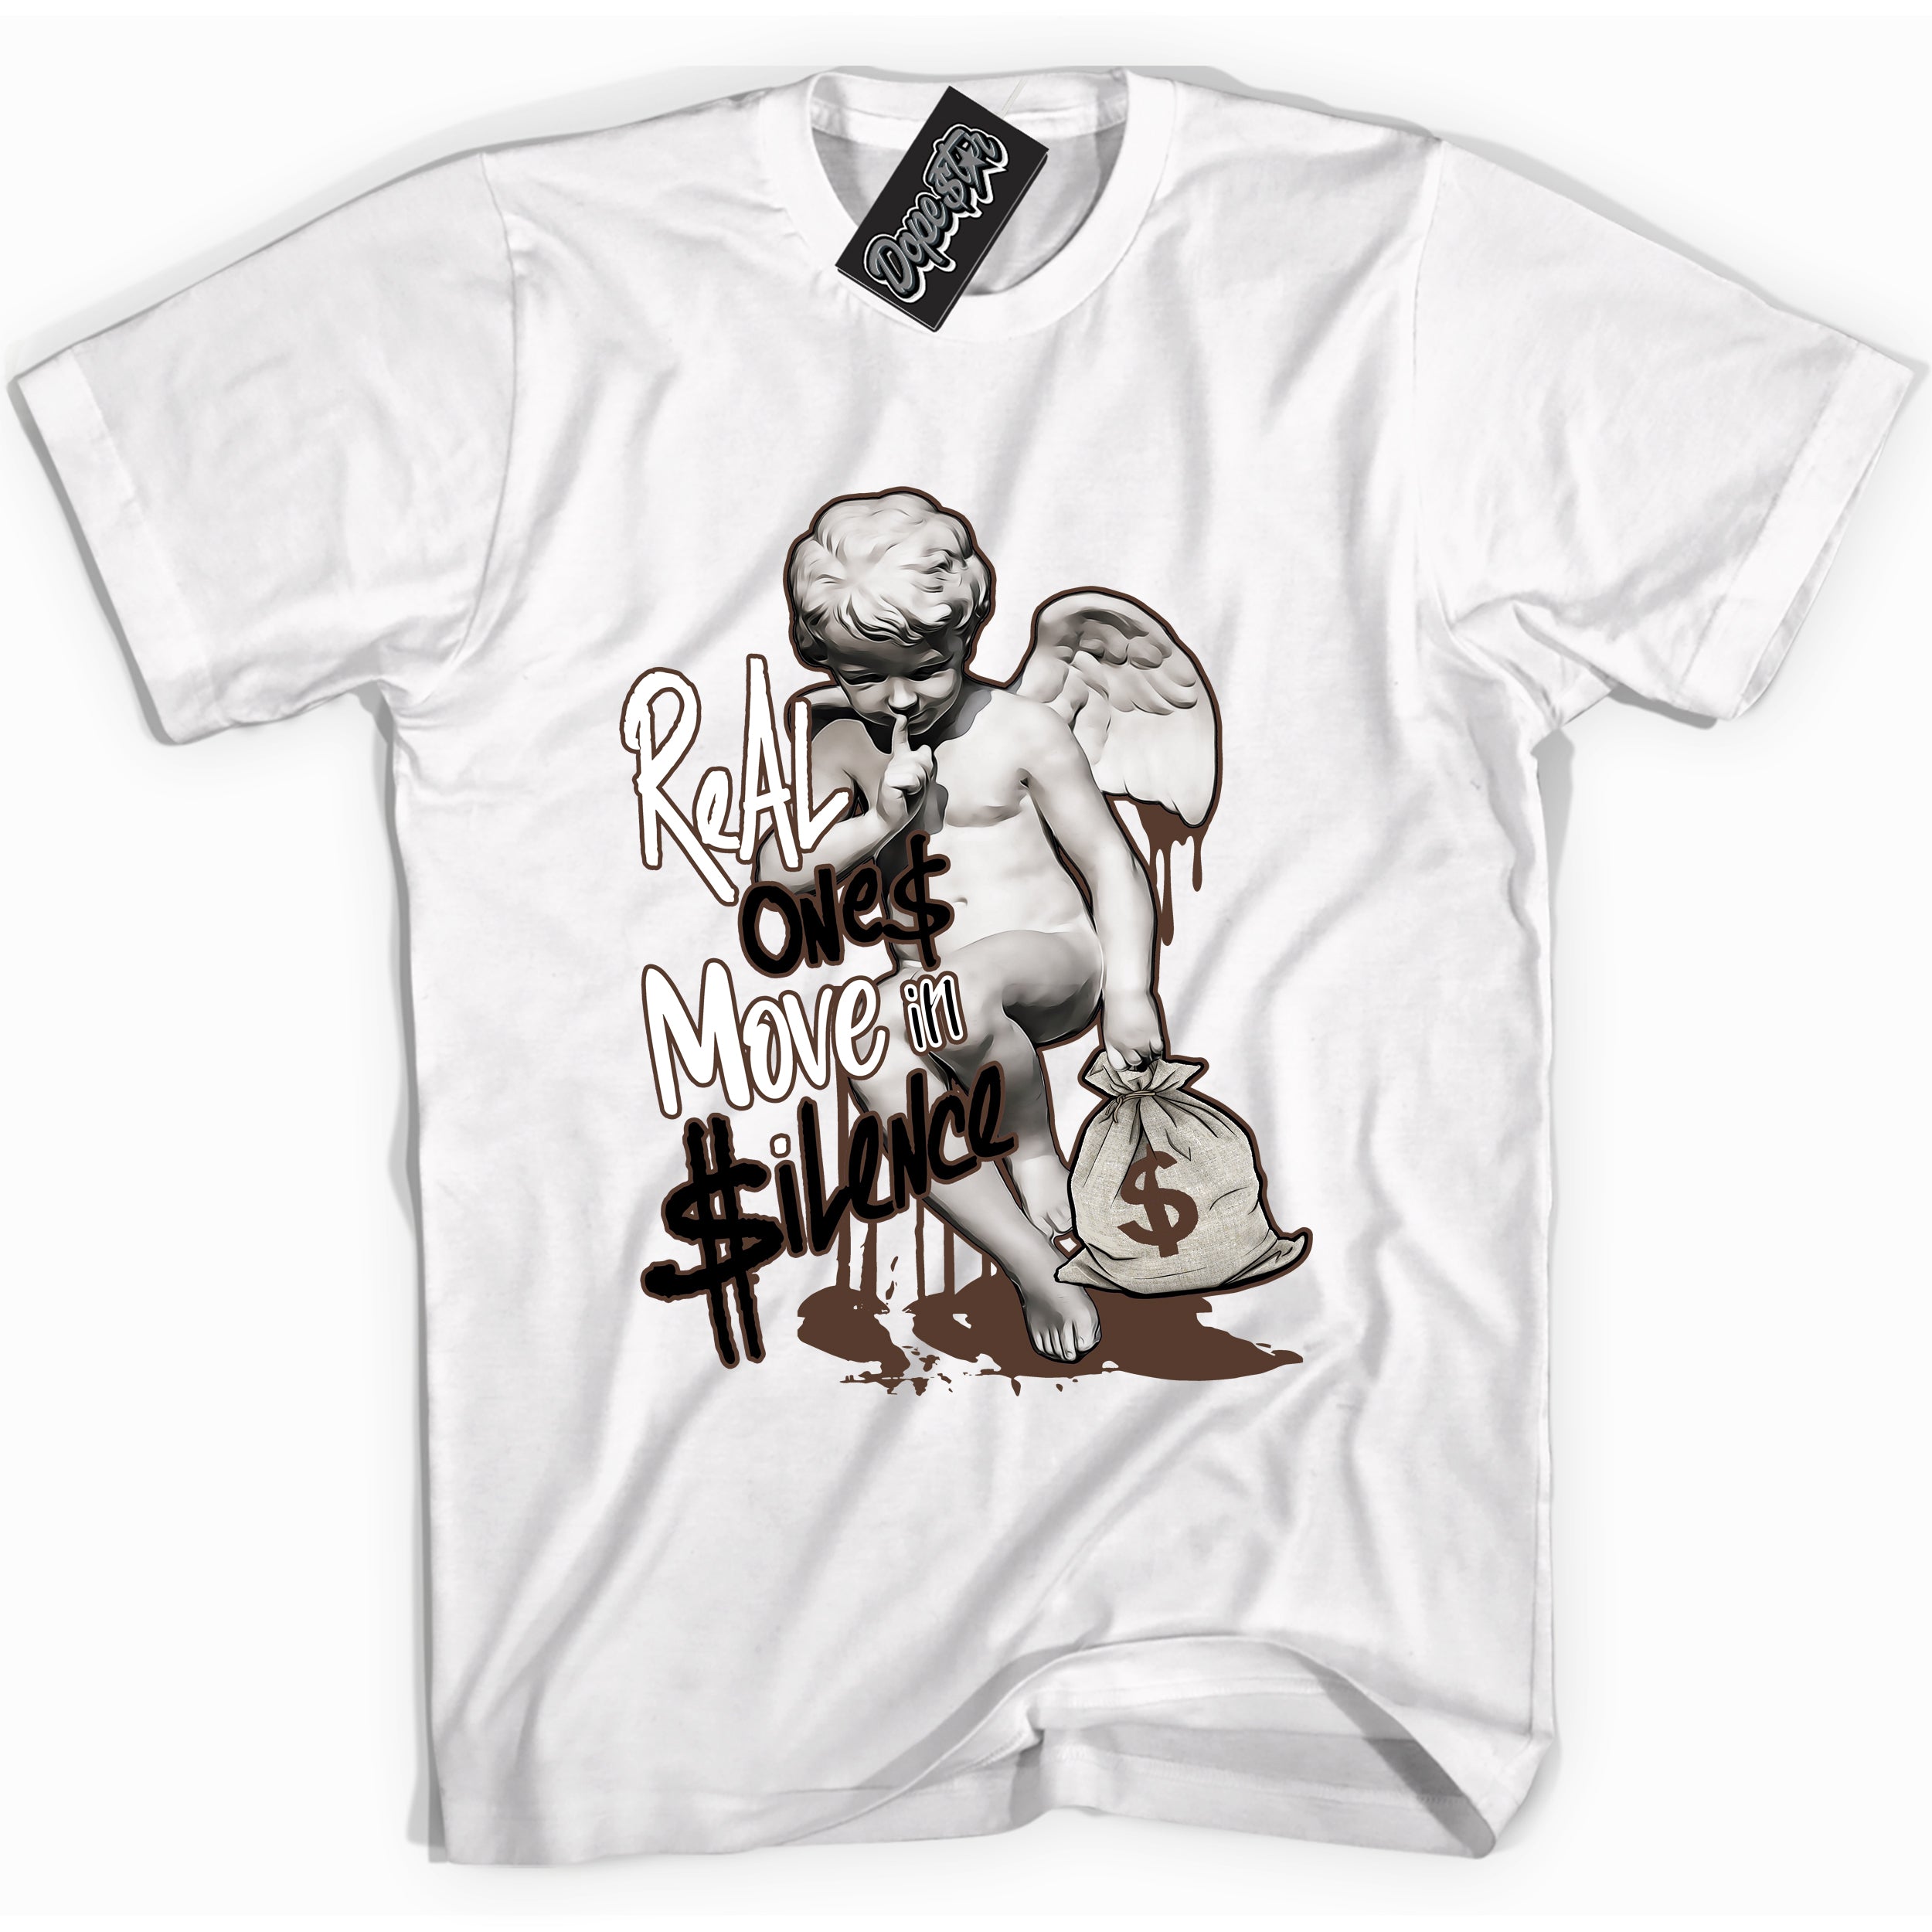 Cool White graphic tee with “ Real Ones Cherub ” design, that perfectly matches Palomino 1s sneakers 